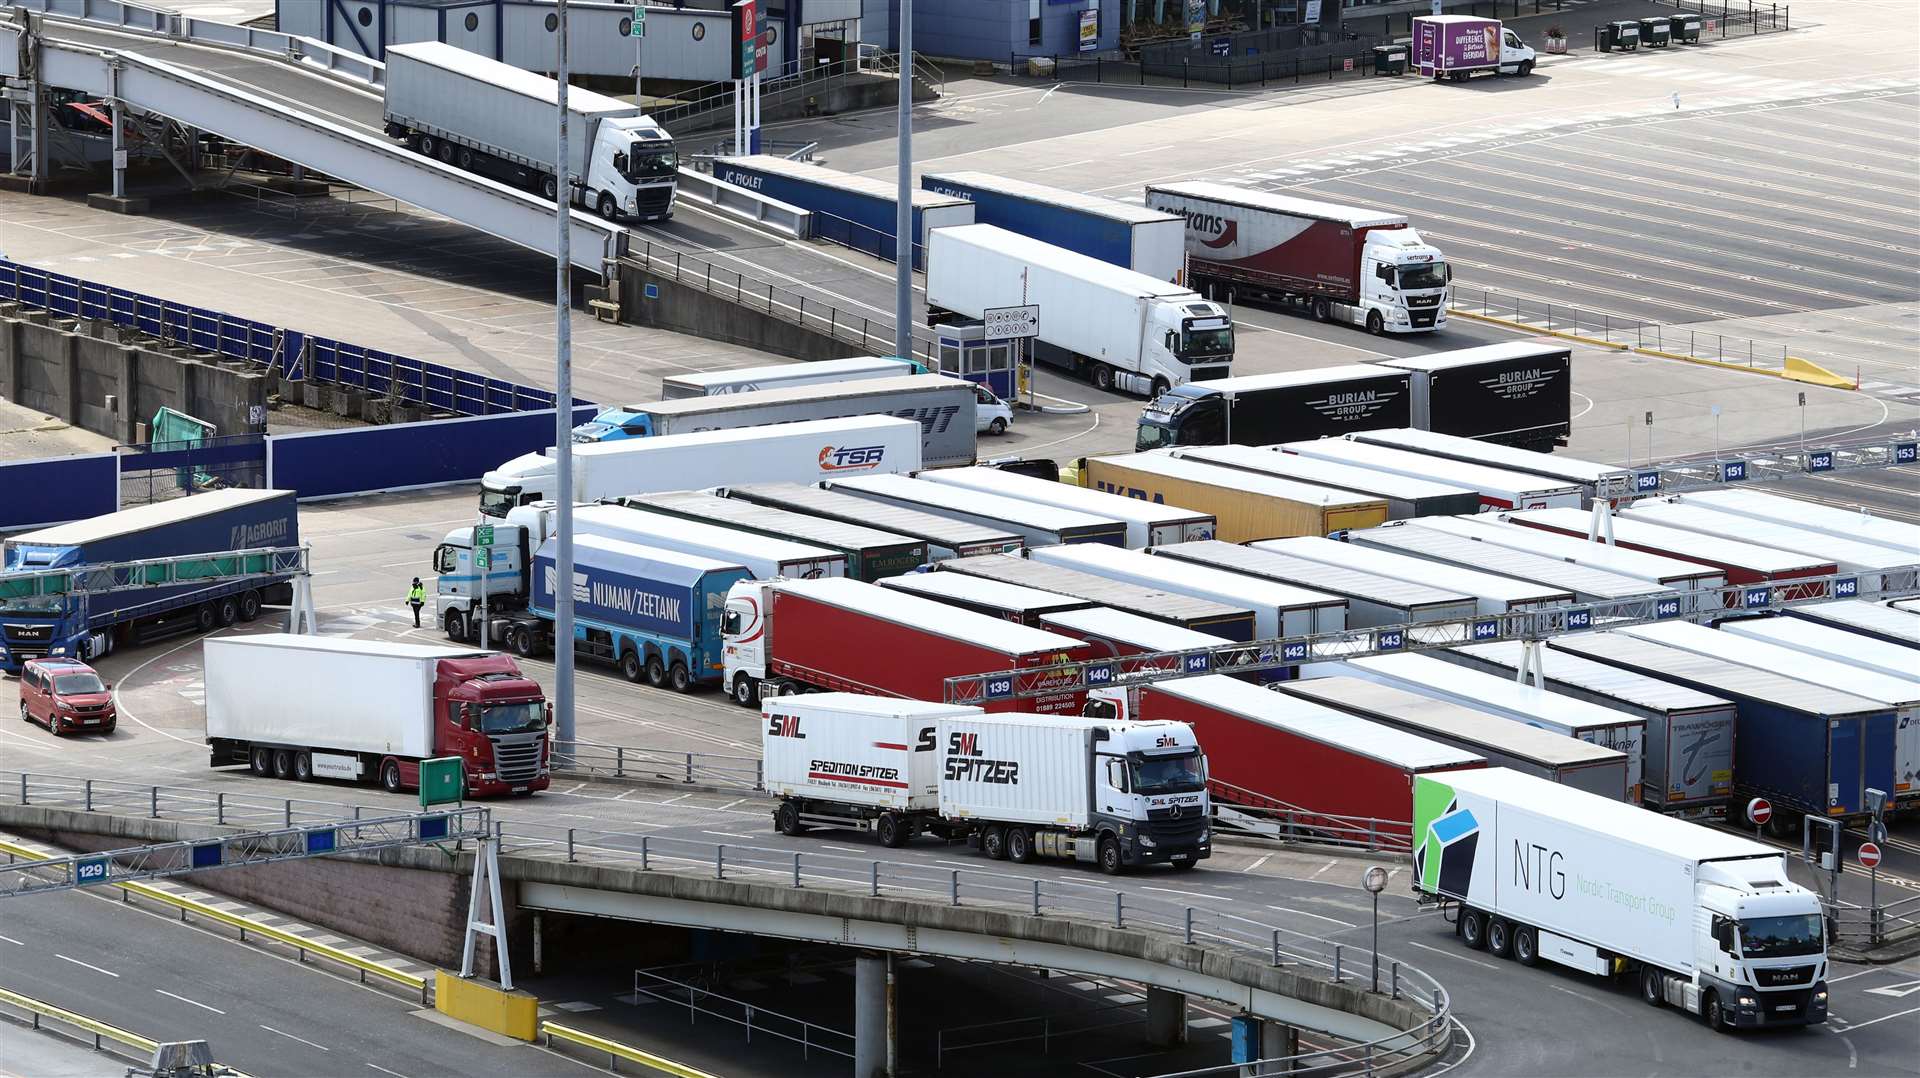 Mr Johnson said the shortage of HGV drivers was a global issue (Gareth Fuller/PA)